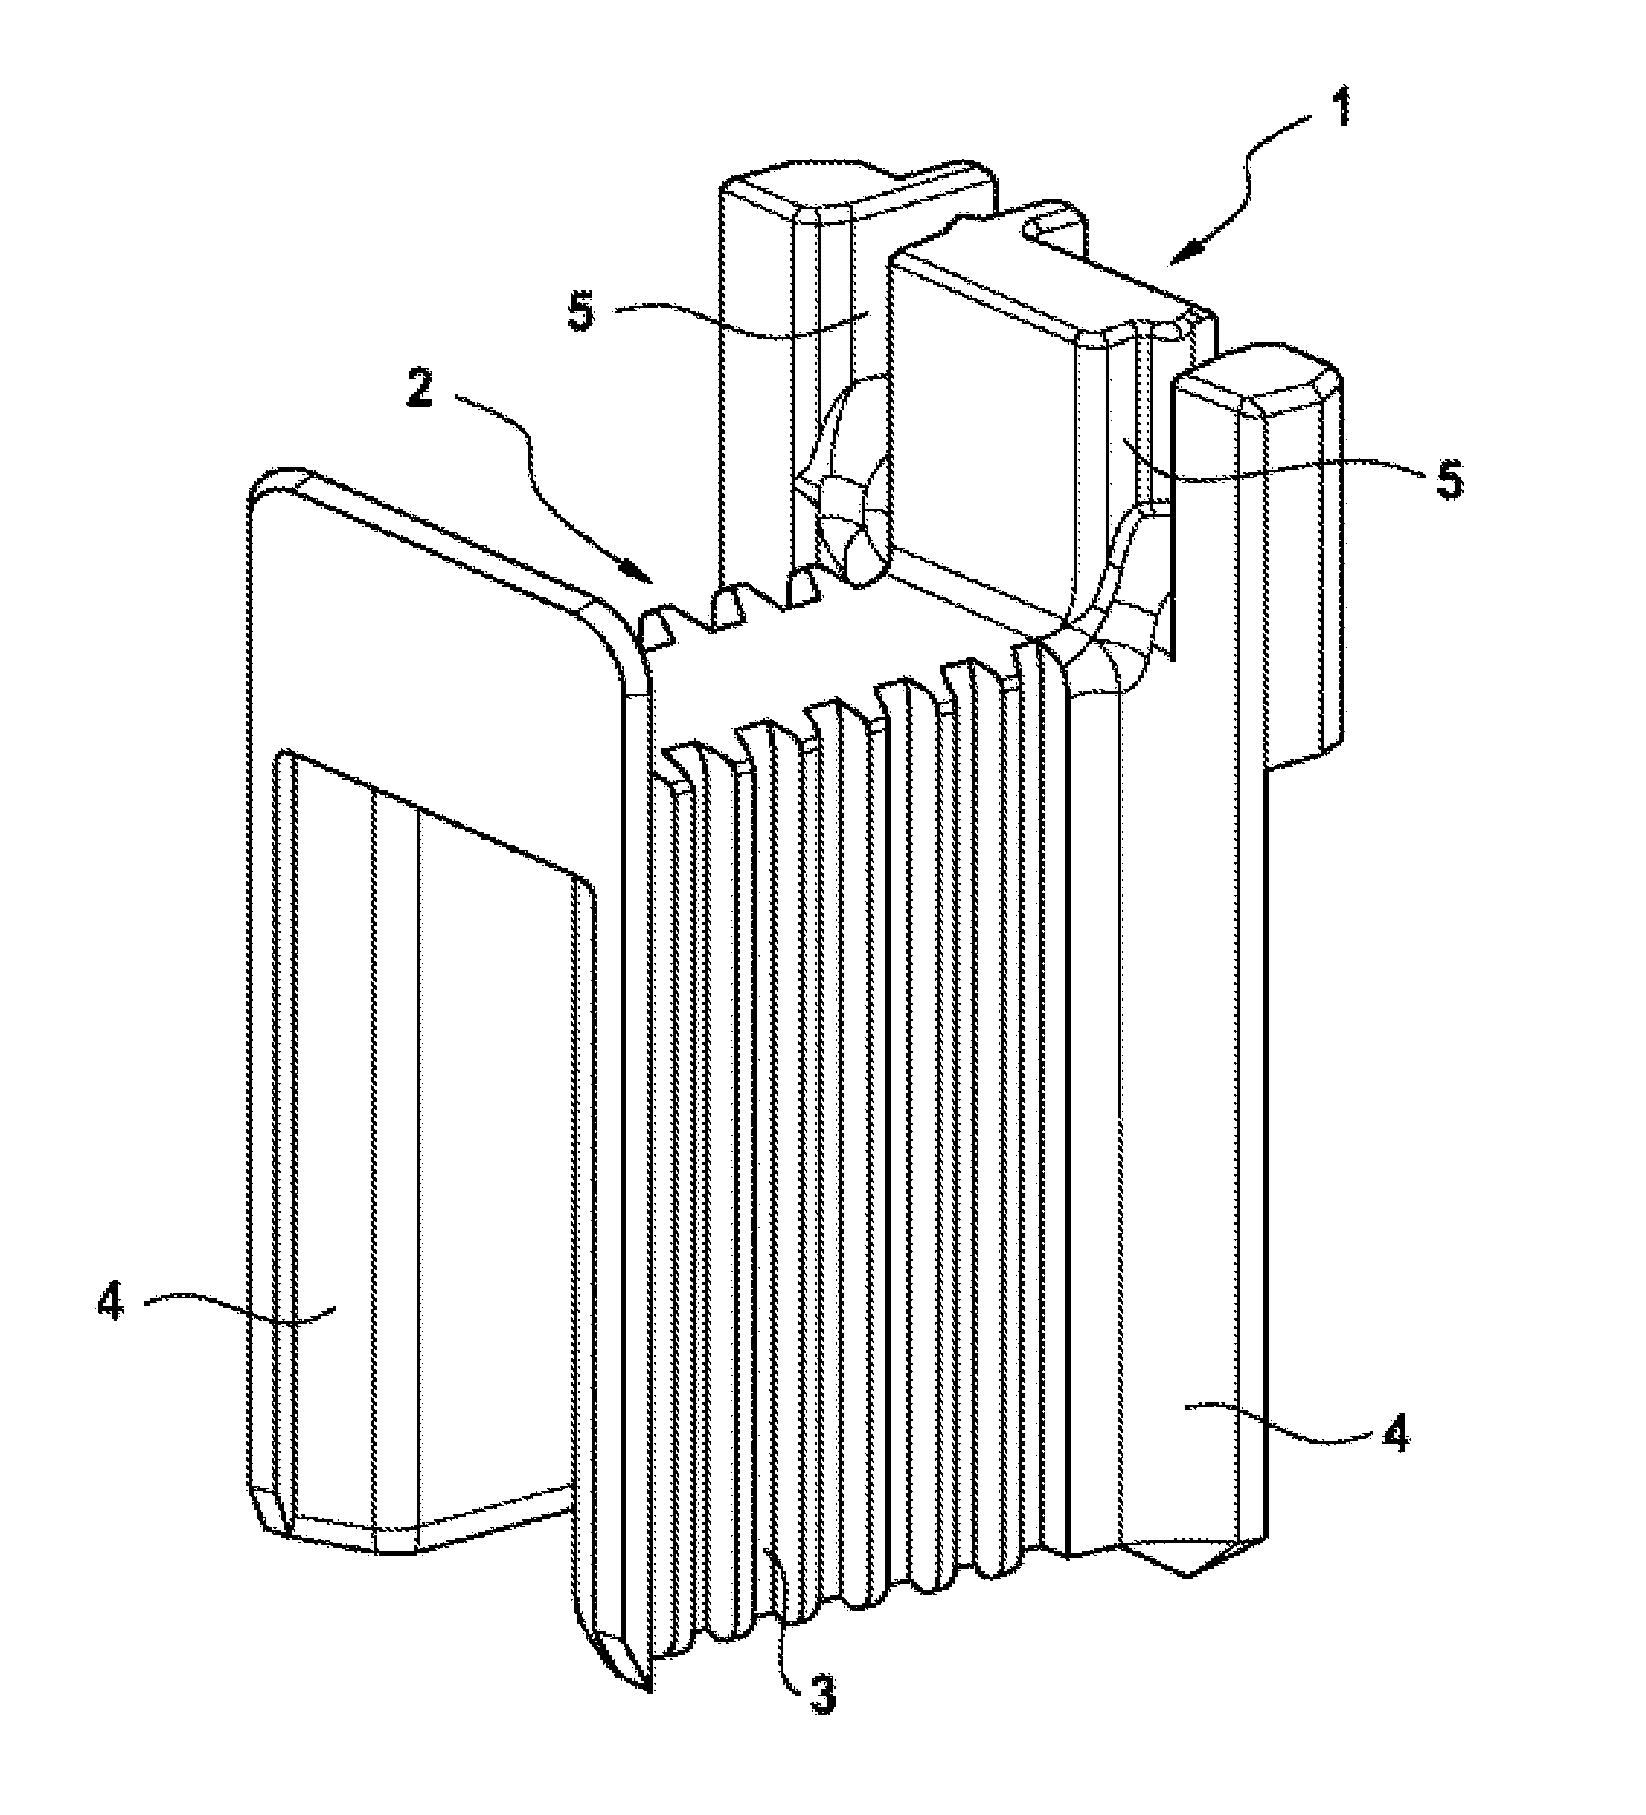 Winding carrier for use in an electrical machine and winding arrangement